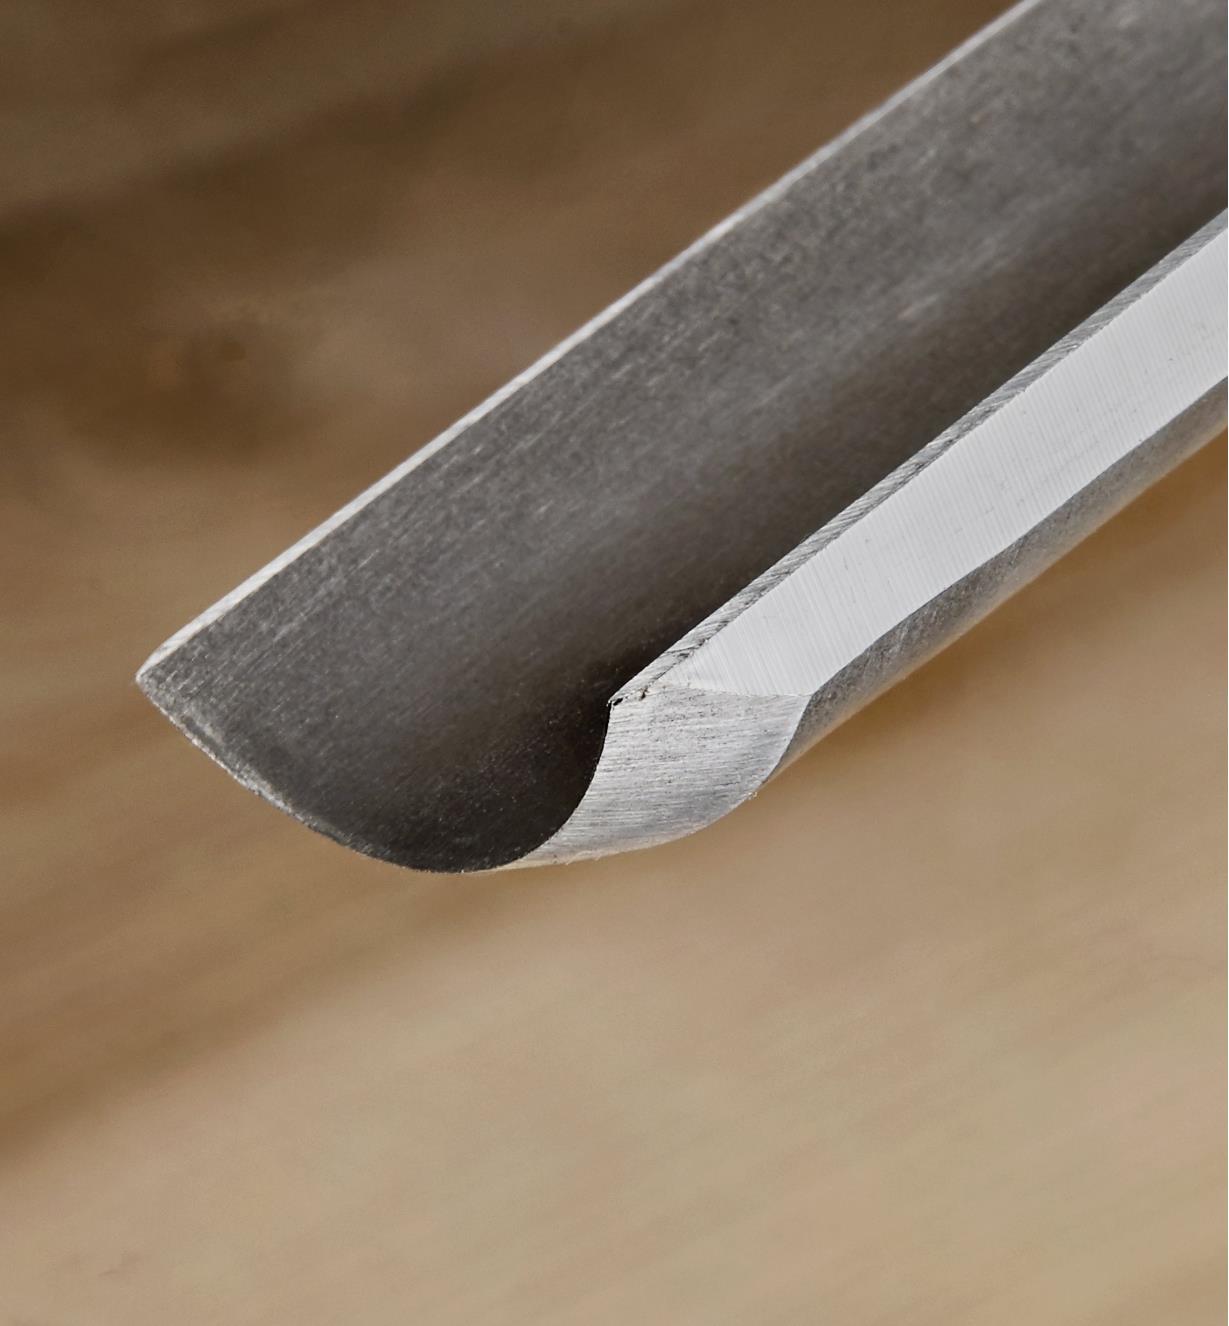 A close-up view of the tip of a Narex firmer gouge showing the curved blade shape